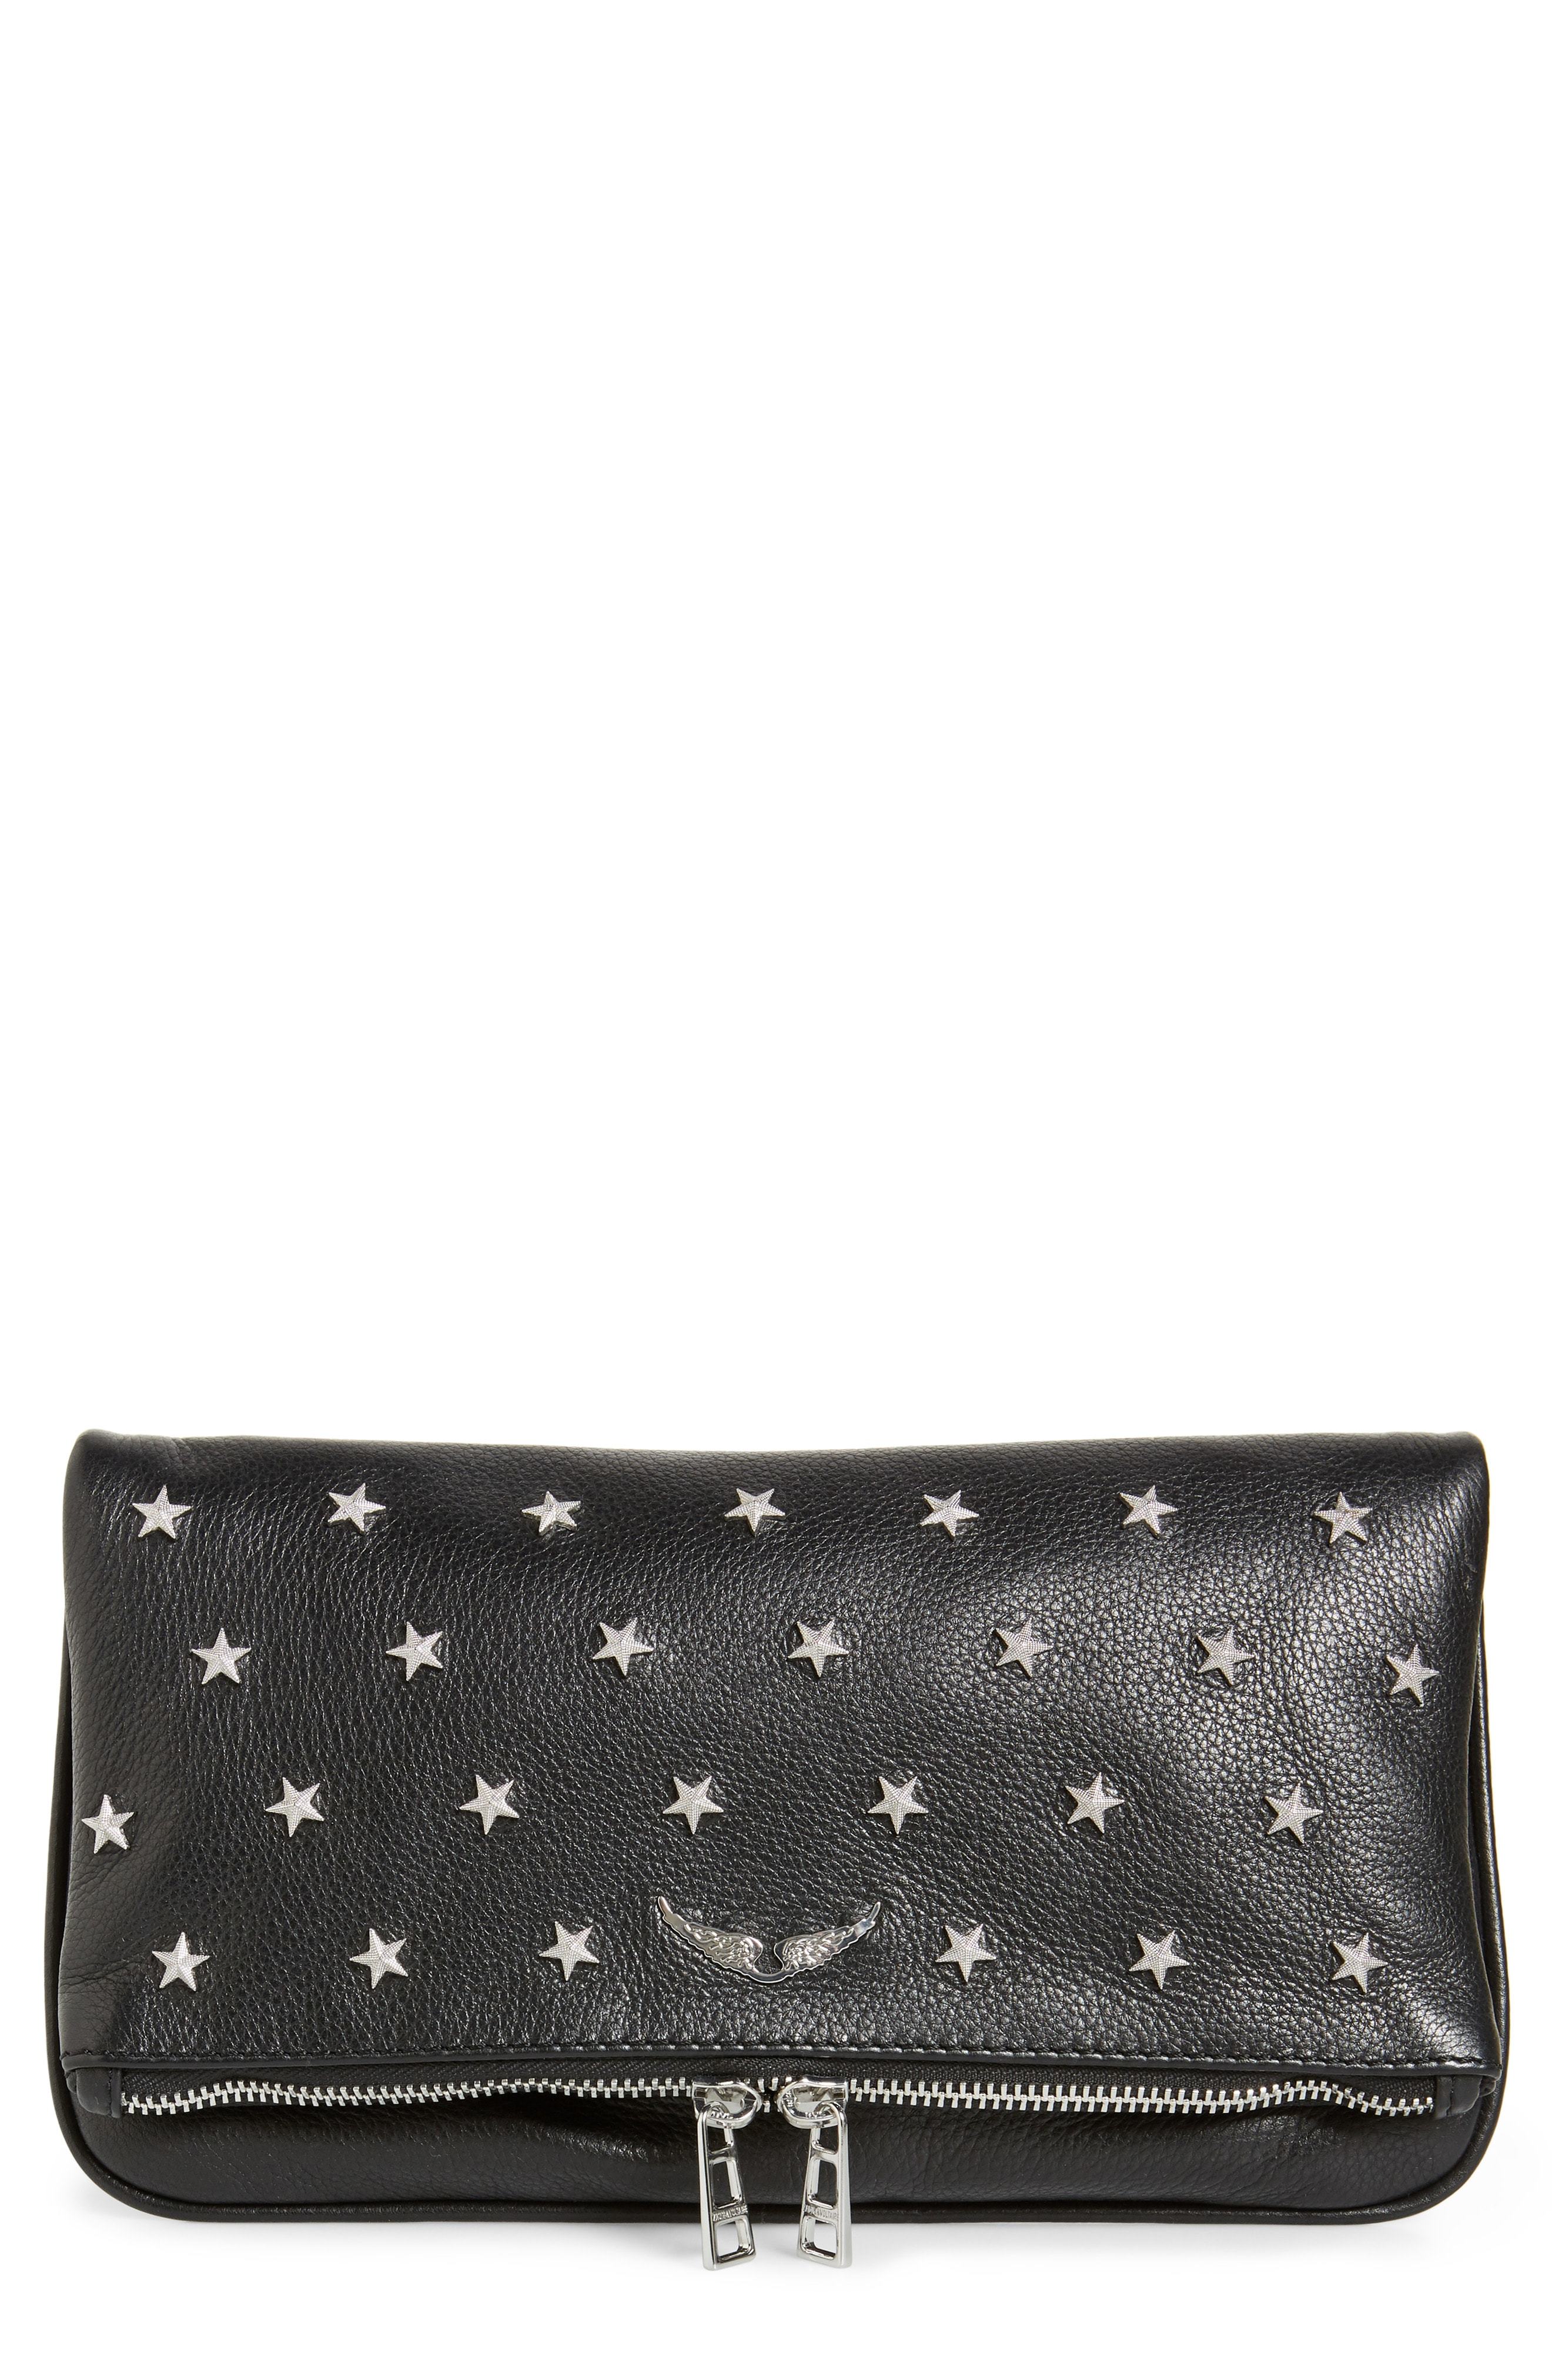 Star Compact wallet in leather with studs | Golden Goose